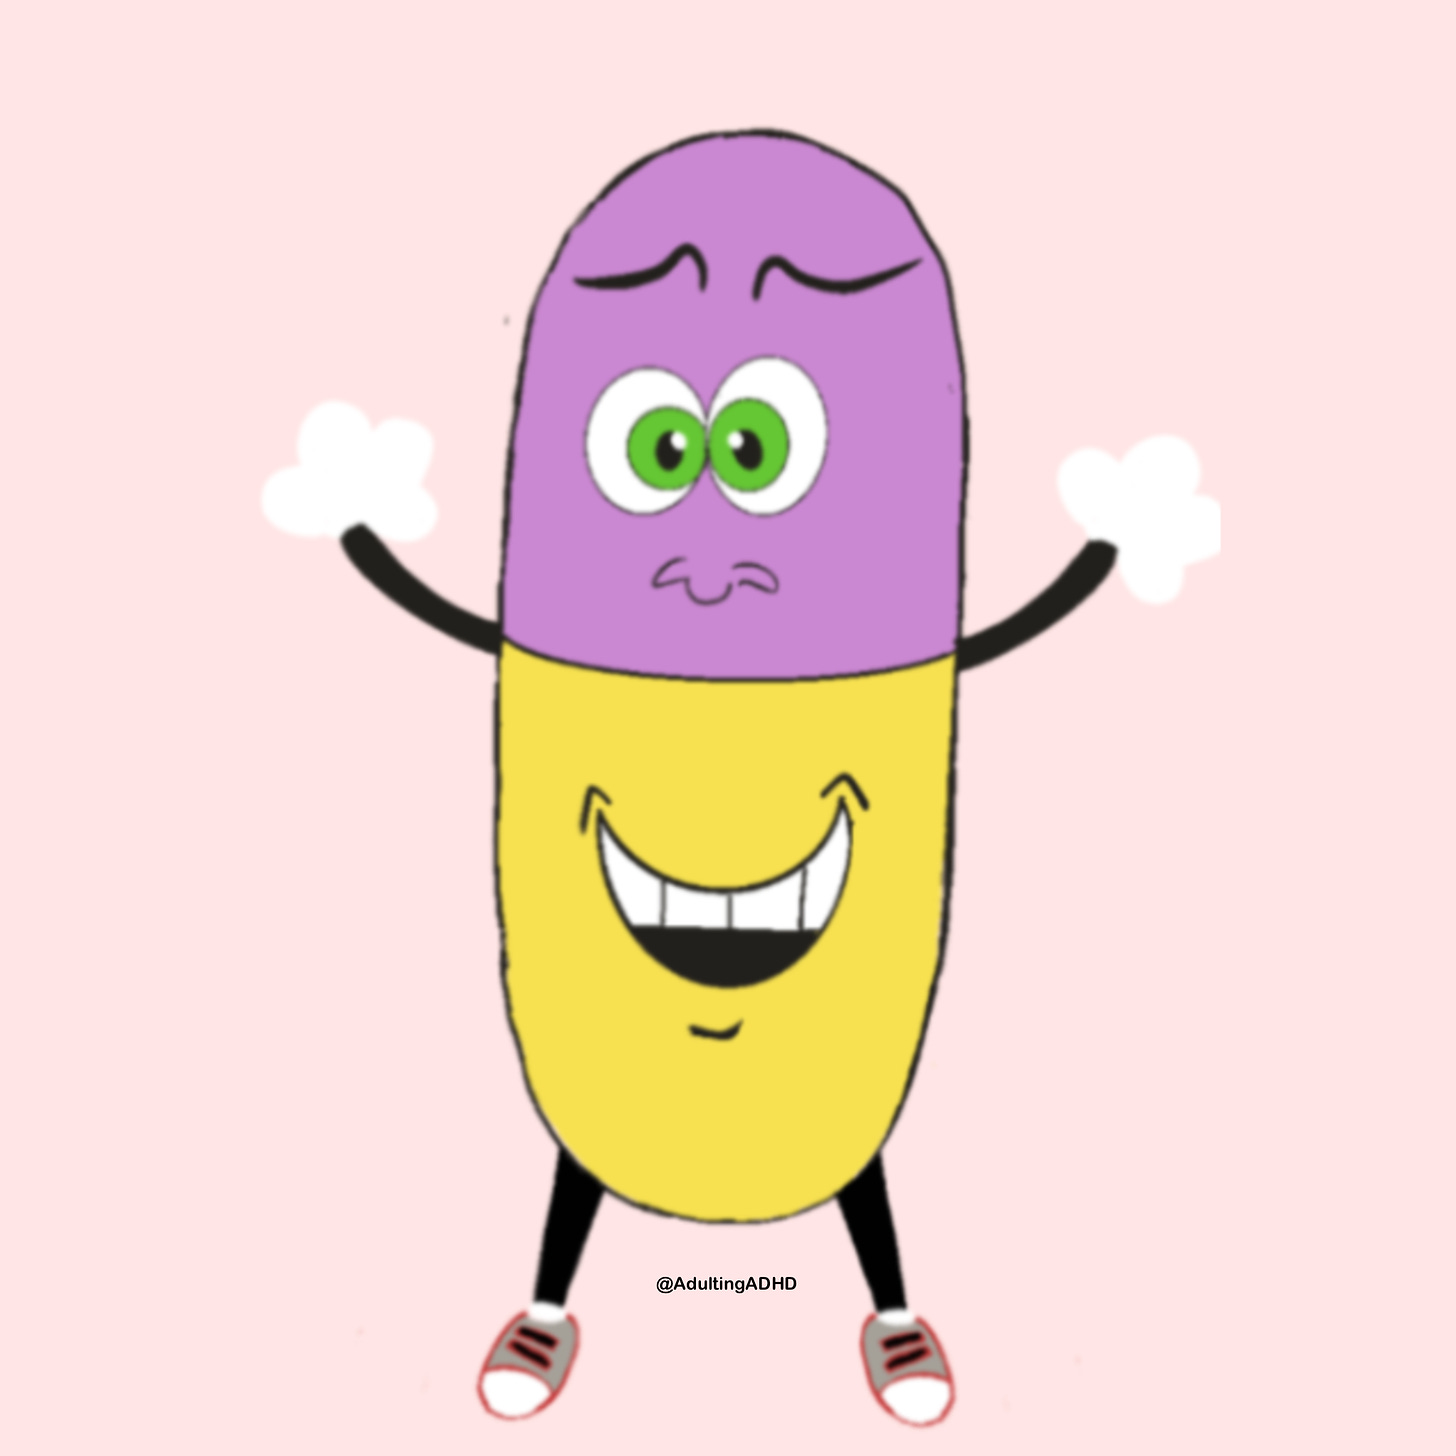 A cartoon drawing of a purple and yellow capsule pill